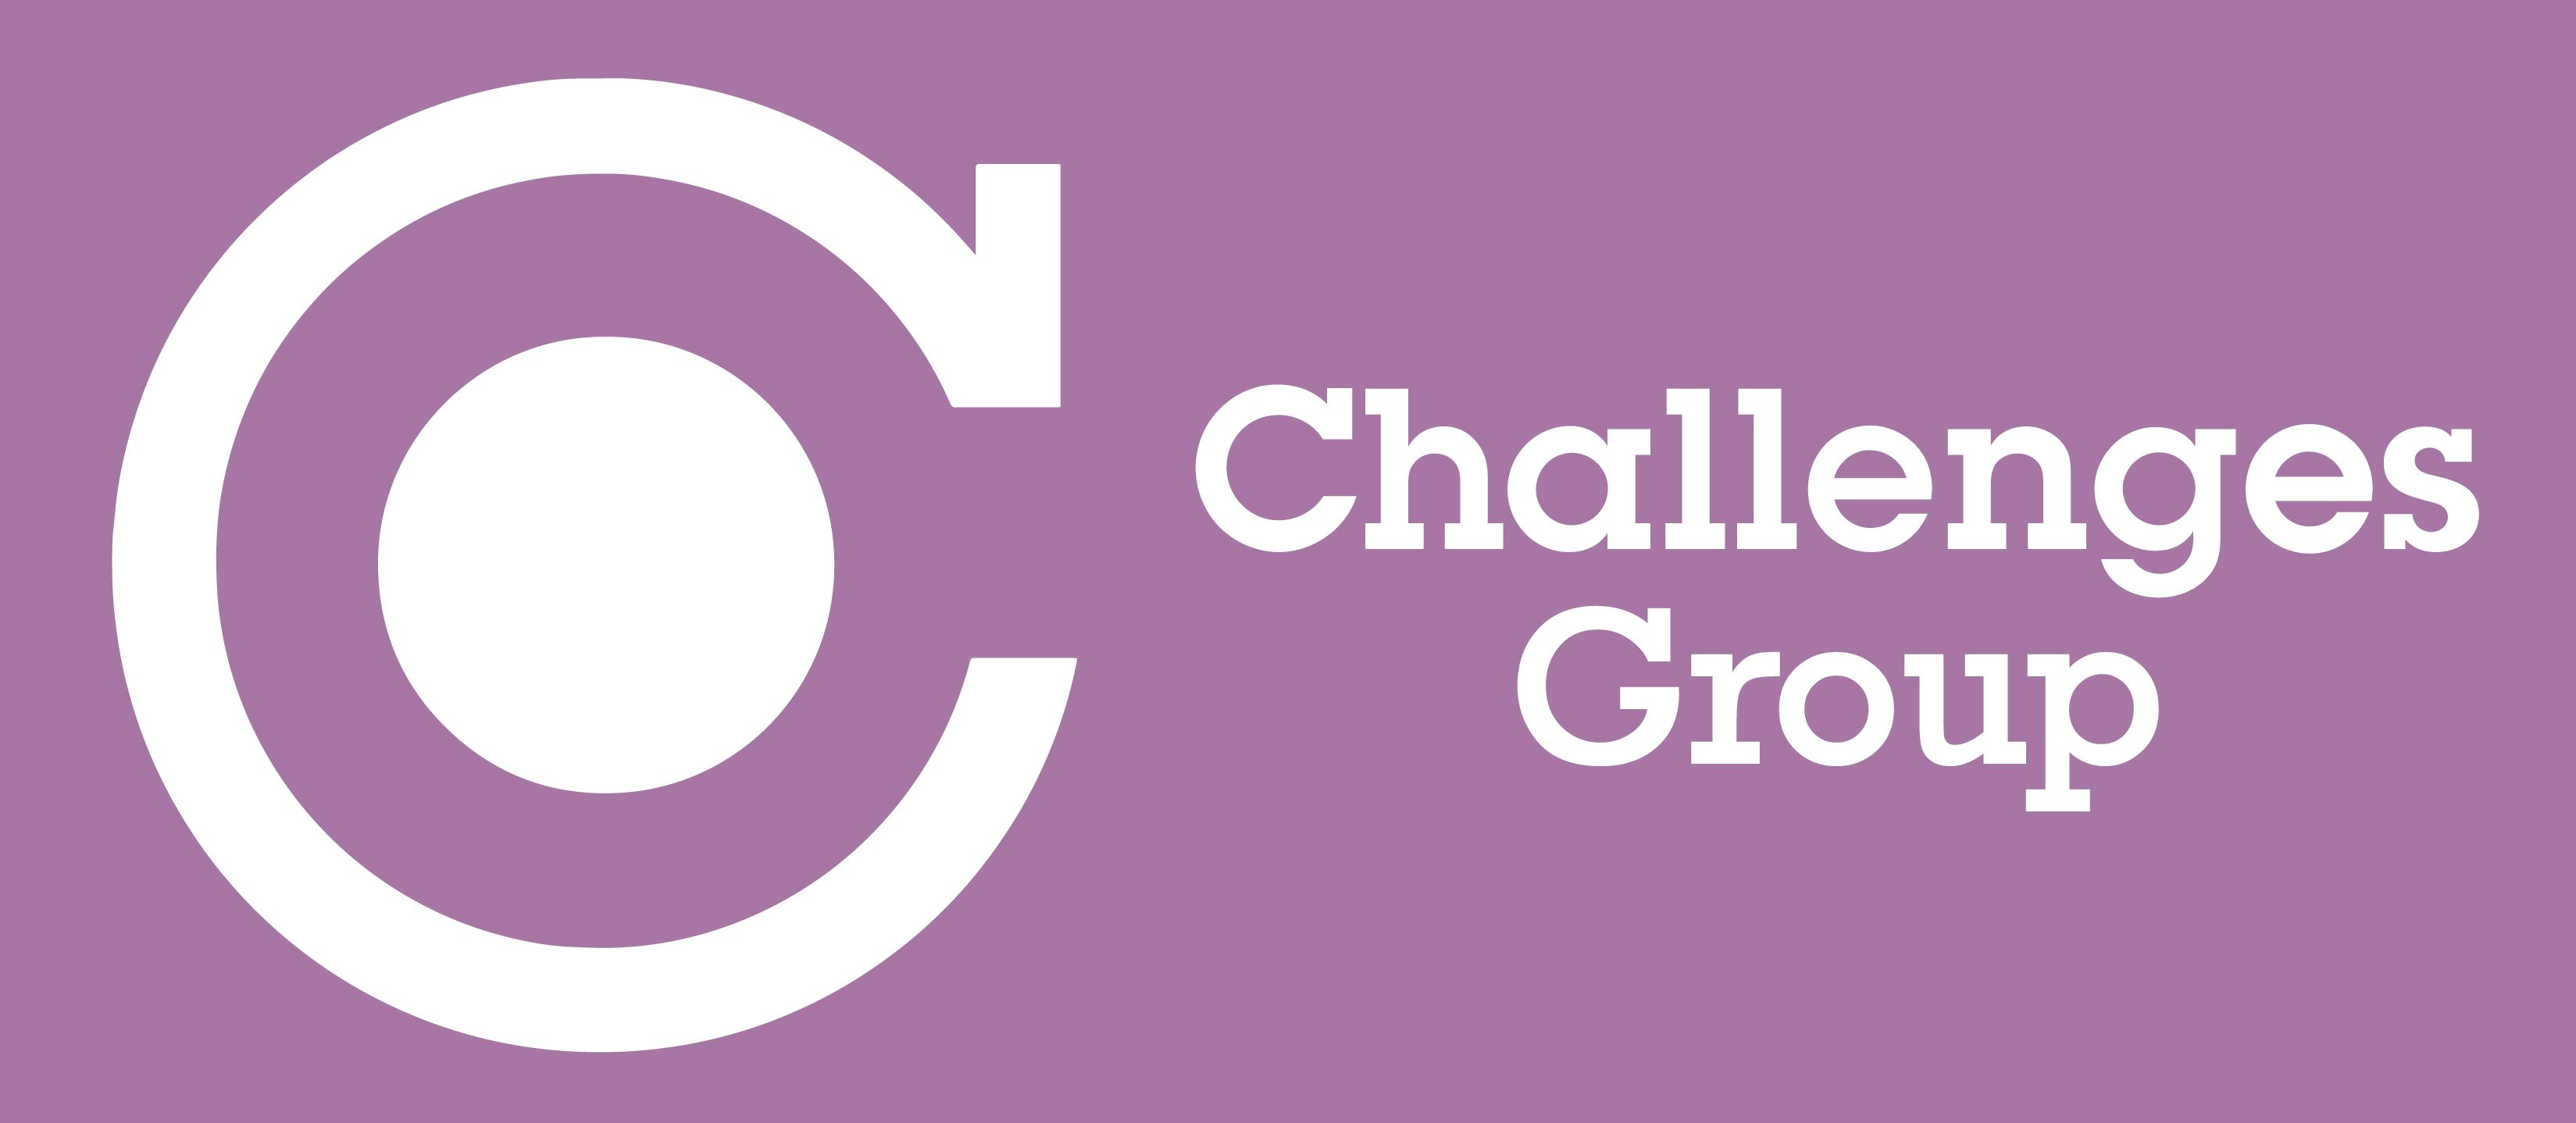 Challenges Group Logo